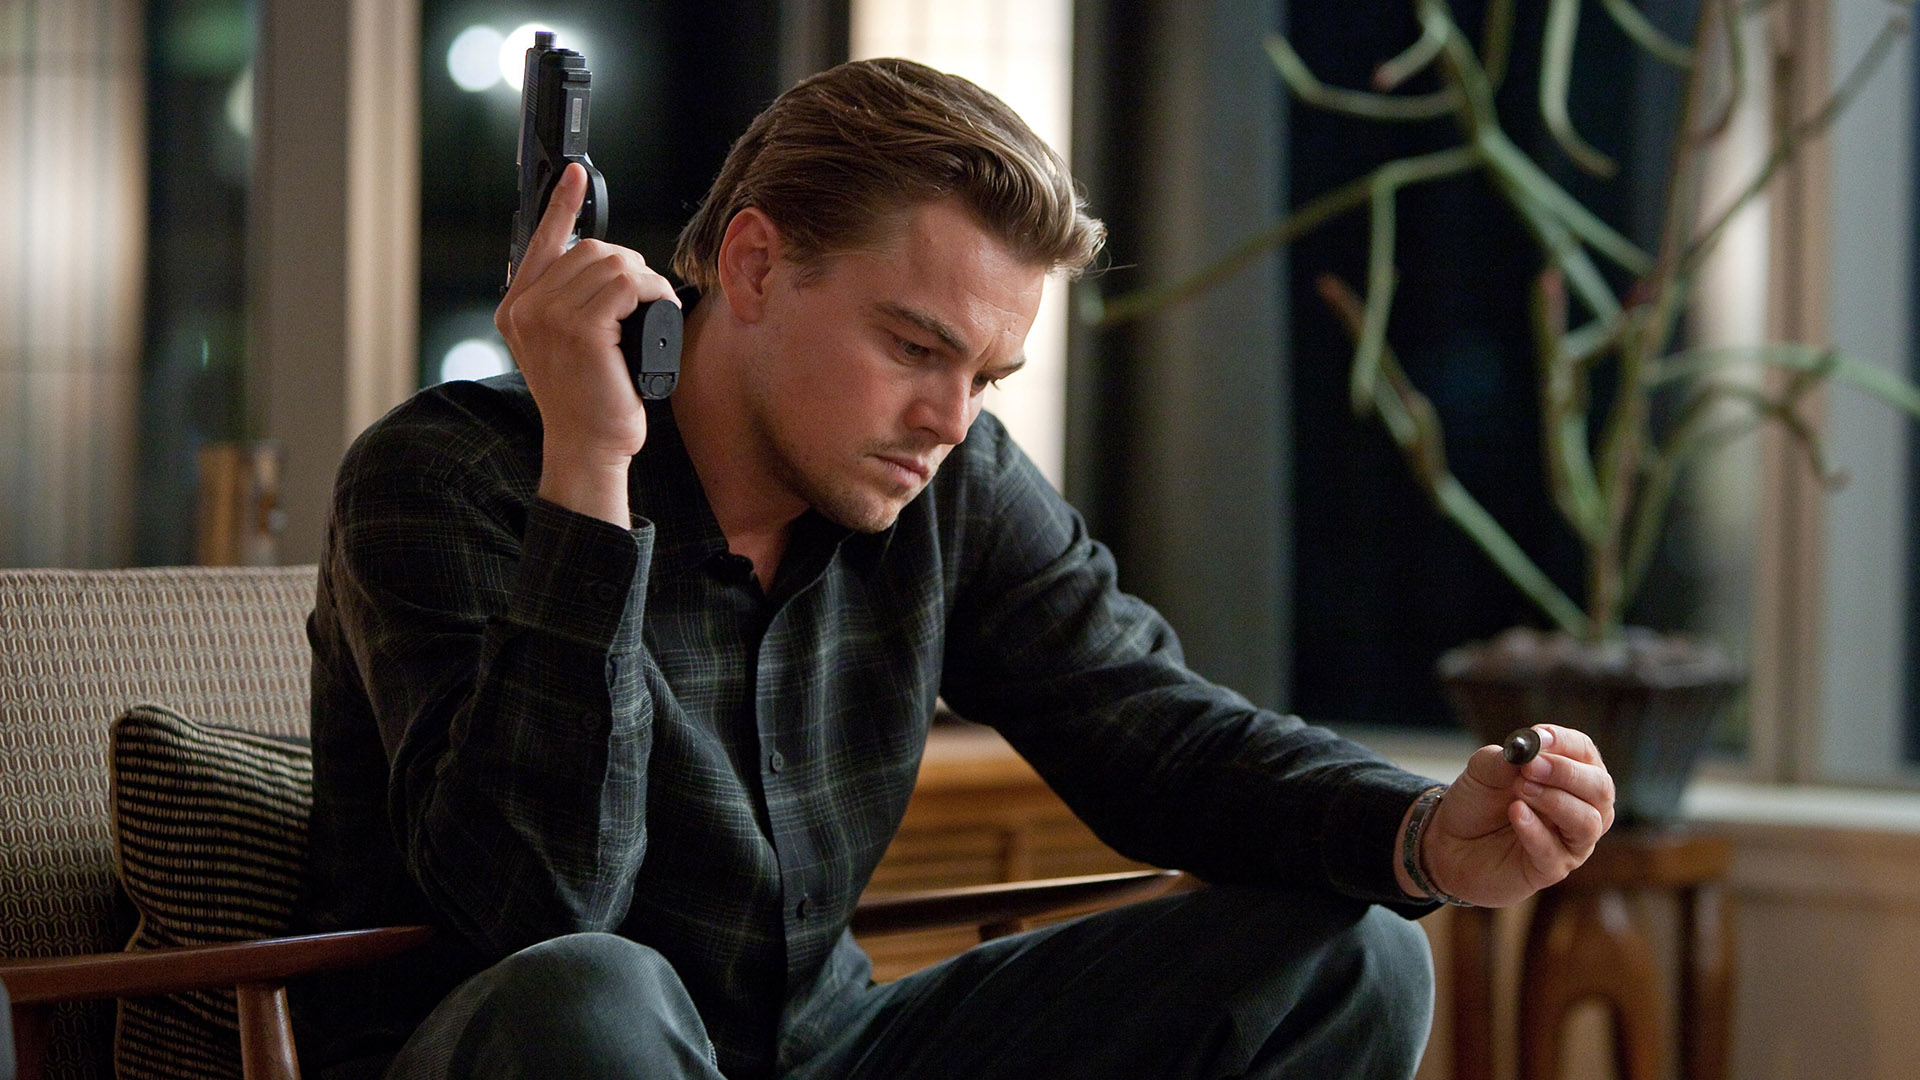 If You Loved Inception: 10 Mind-Bending Movies to Add to Your Watchlist